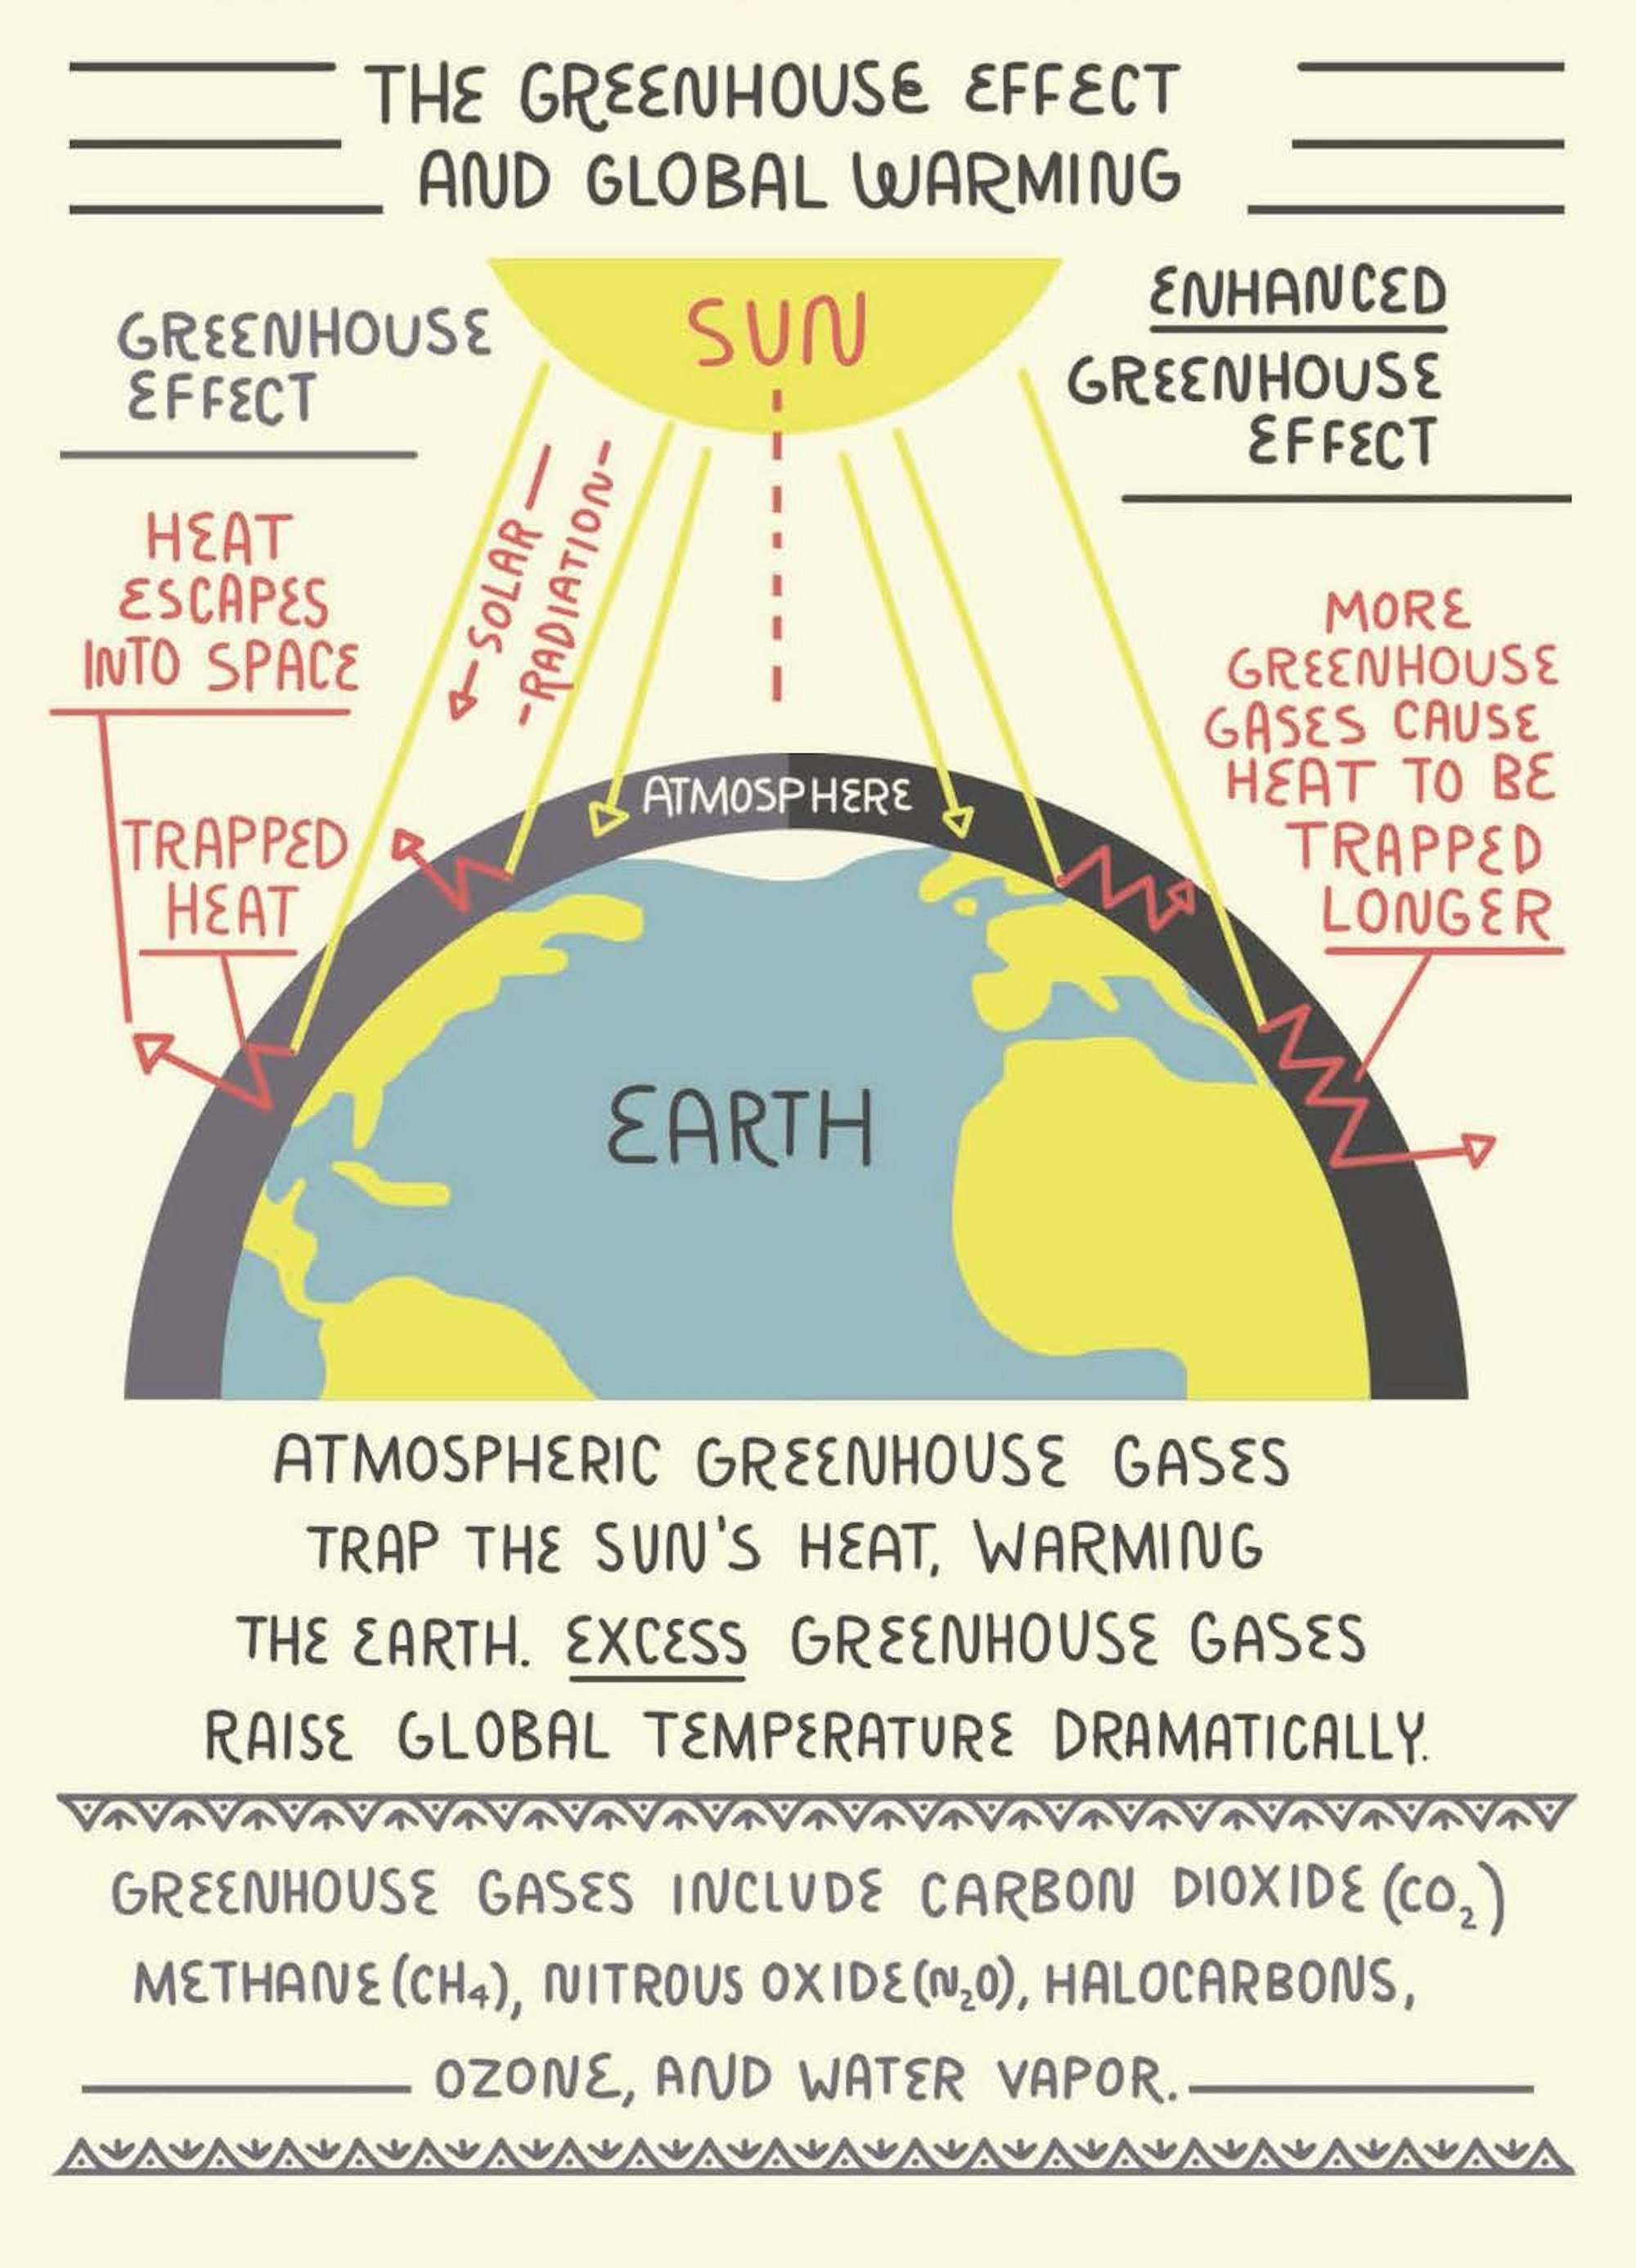 What Is the Greenhouse Effect and How Does It Cause Global Warming?